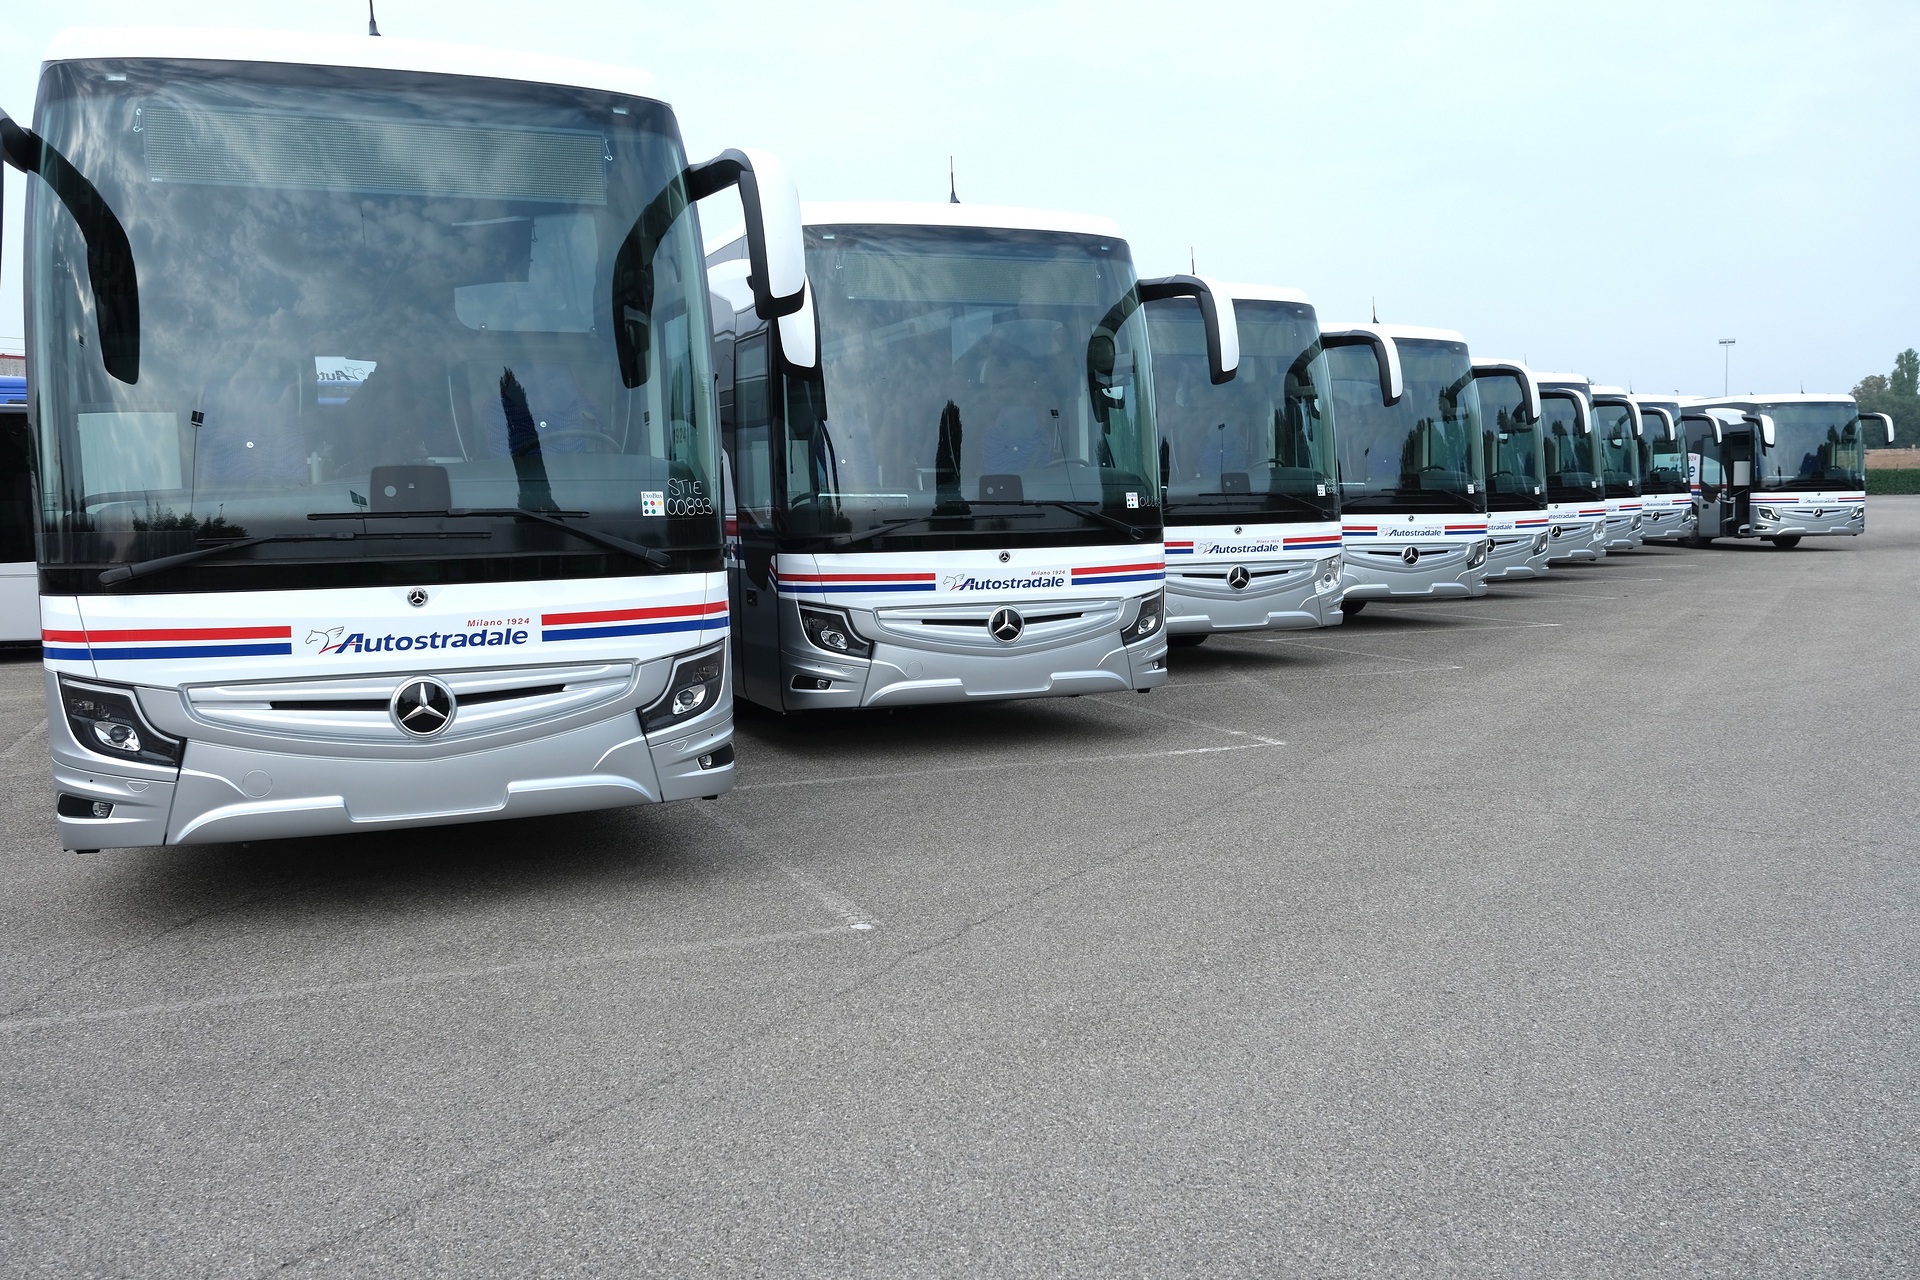 Thirty Mercedes-Benz Tourismo M/2 high-deck touring coaches for Gran Tourismo and regular services in northern Italy